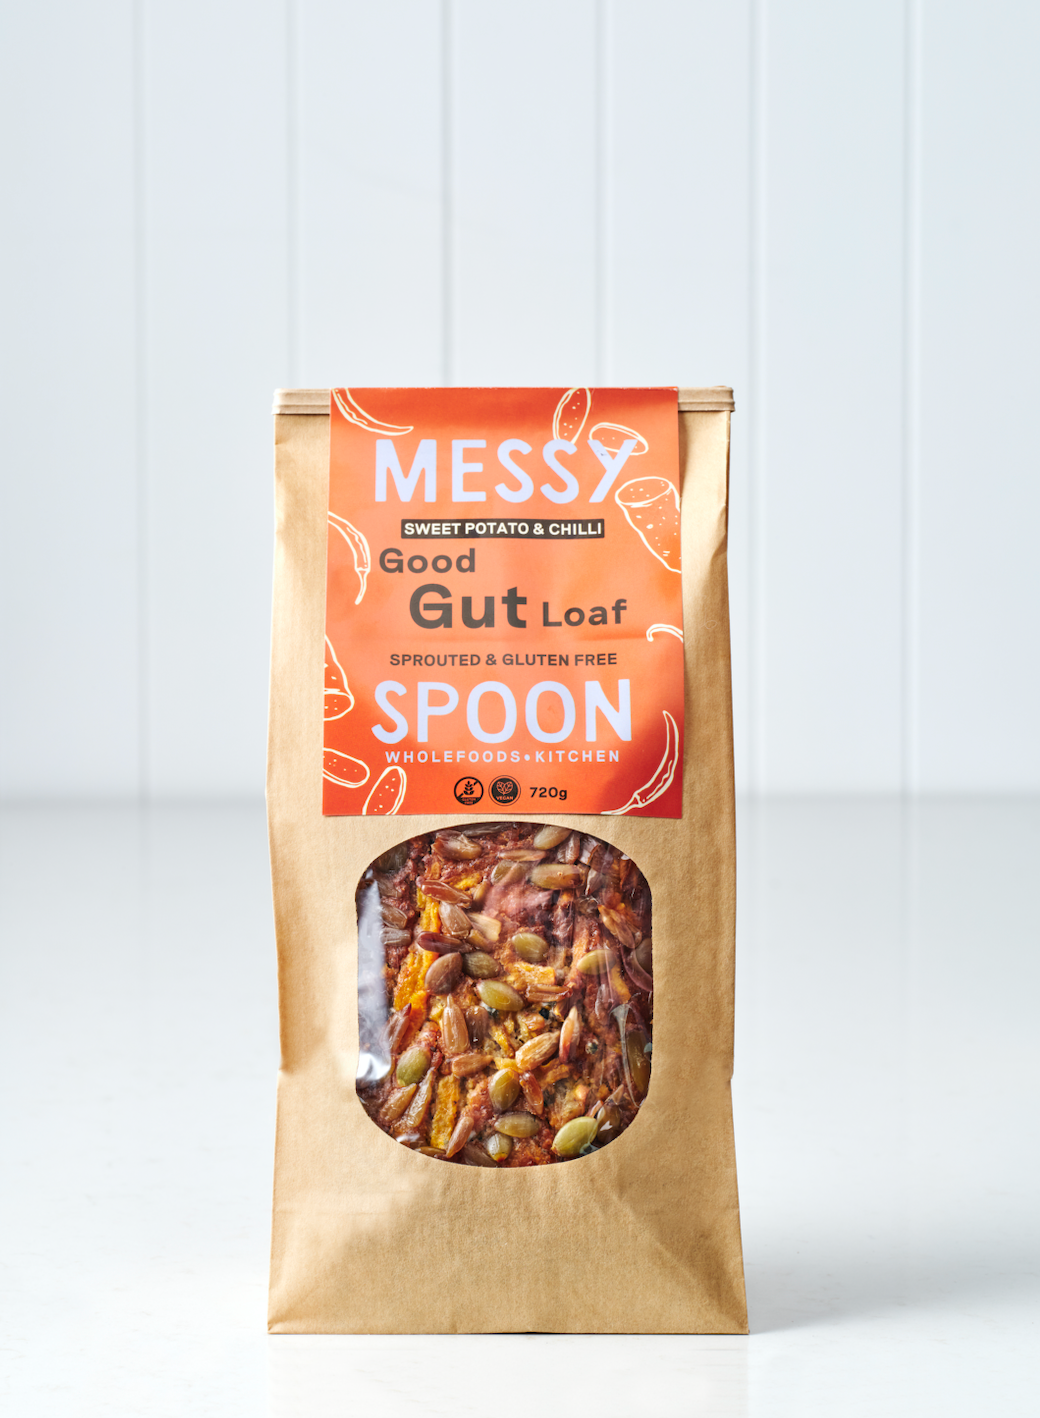 Good Gut Loaf - Sweet Potato & Chilli Bread (Gluten Free & Sprouted)